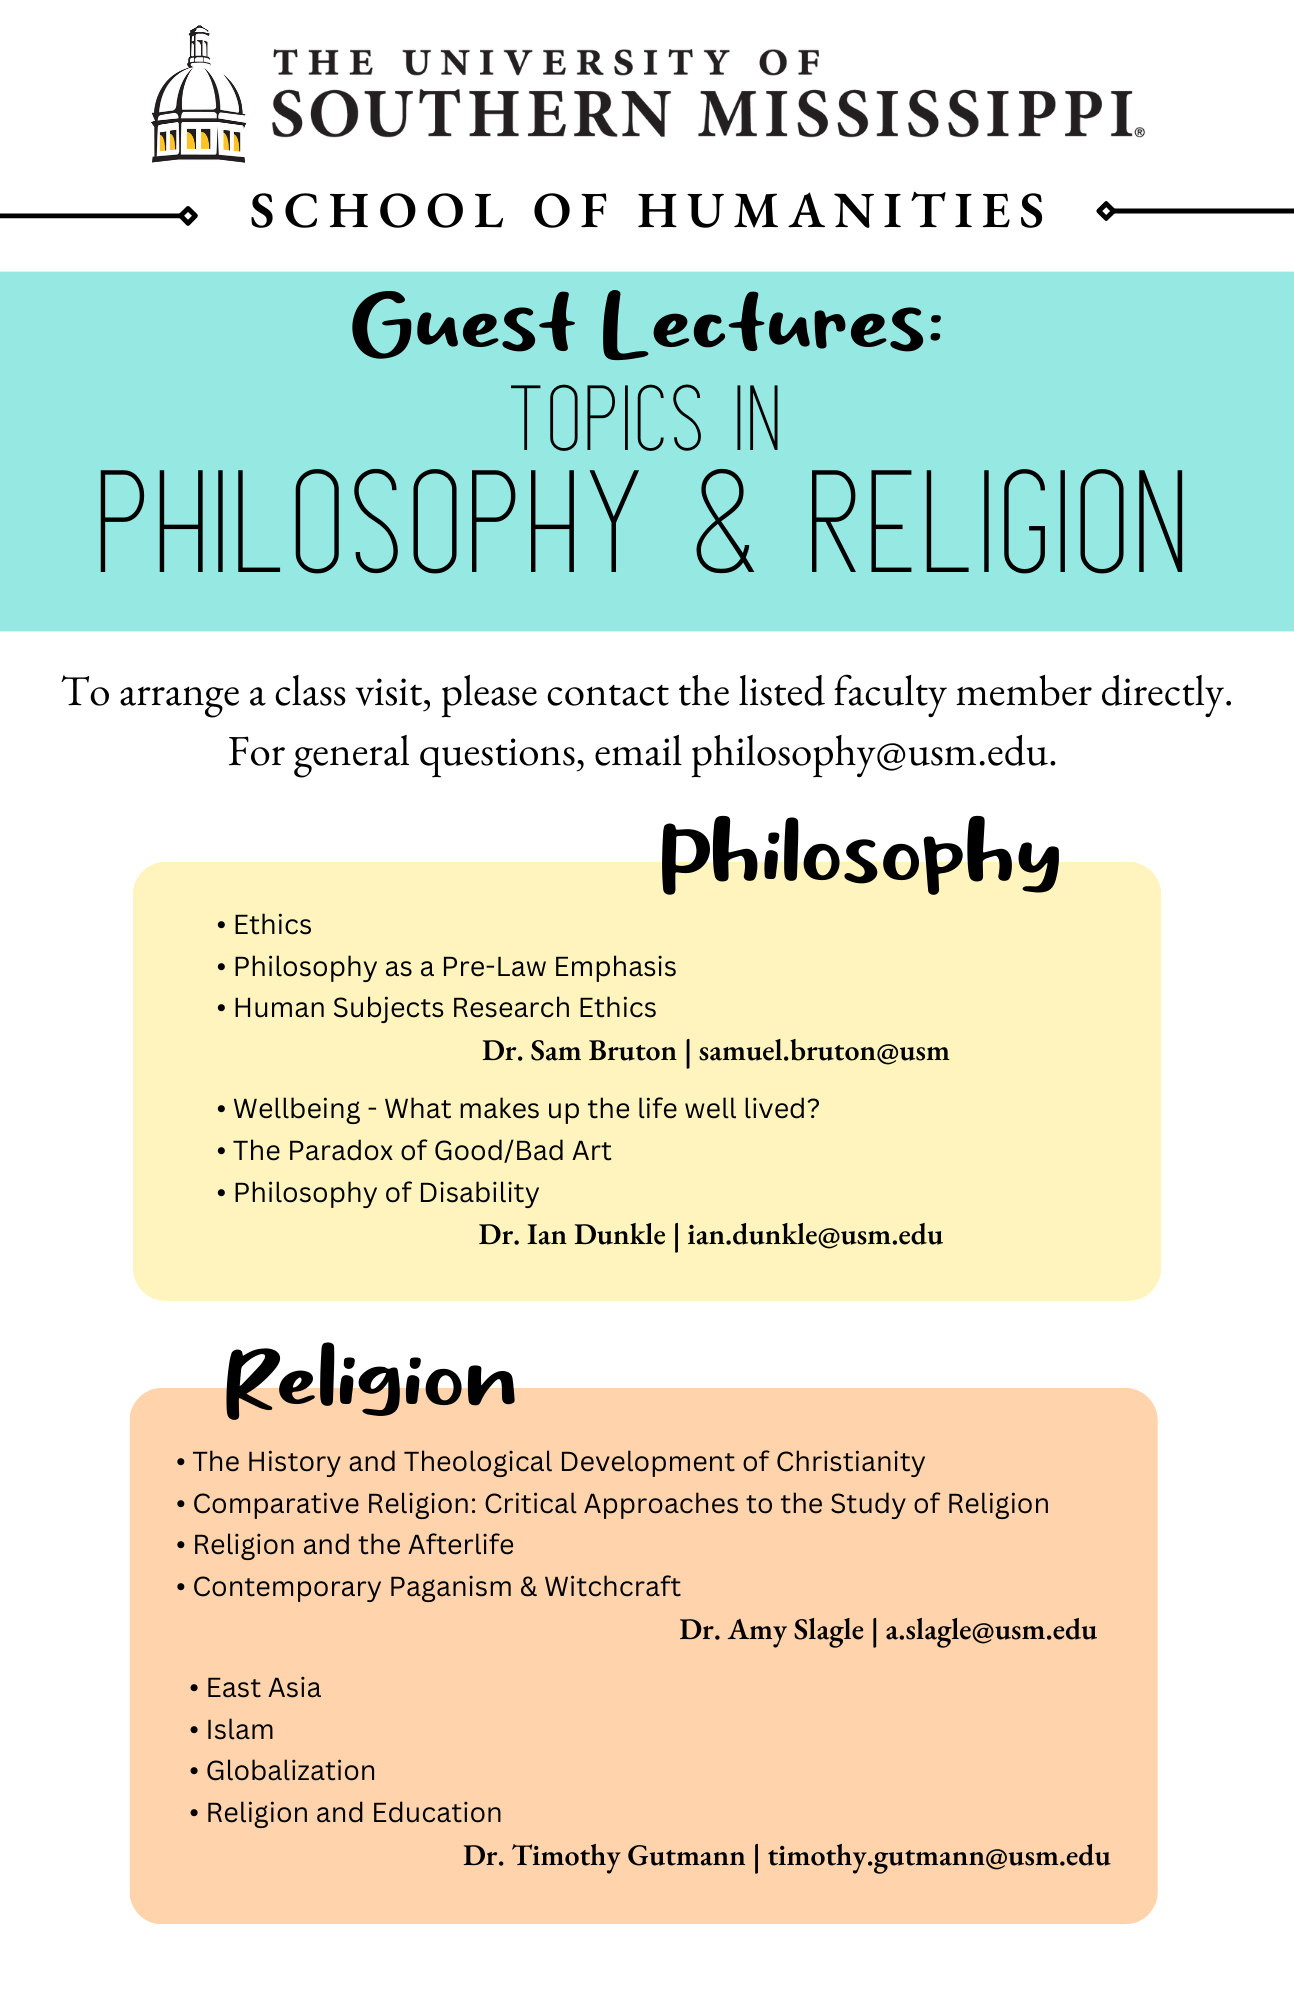 Topics in Philosophy and Religion